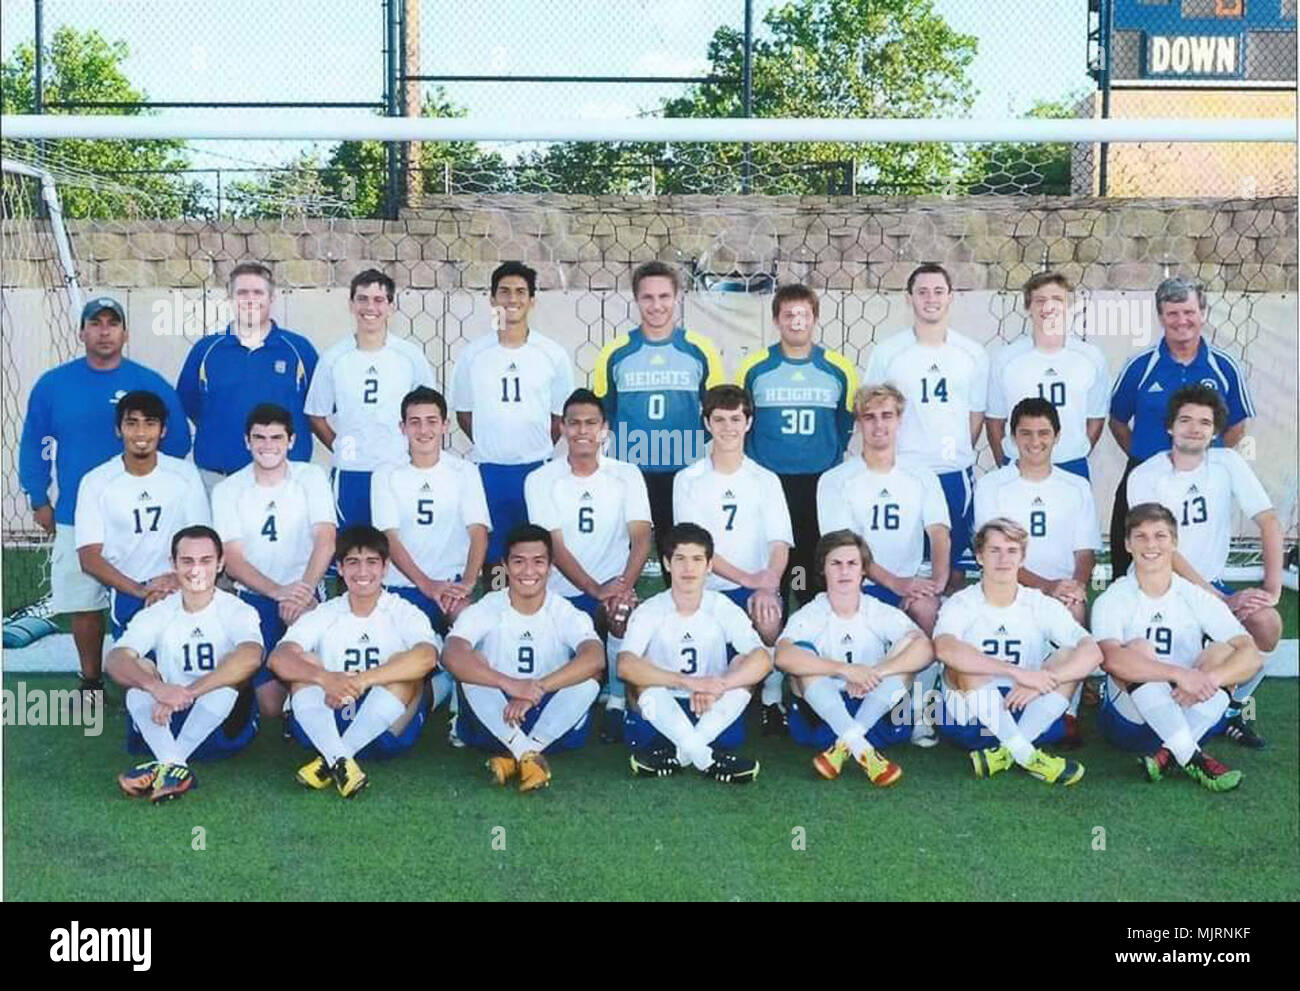 Hernando Ortega, top row, third from the left, gathers for a photo with his fellow teammates before a match as part of the San Antonio Alamo Heights High School soccer team in Corpus Christi, Texas, April 13, 2012. Ortega and his teammates would go on to become state champions that year. Now a satellite systems operator with the 4th Space Communications Squadron, Ortega has been able to balance both service and his passion for the sport. Armed Forces and civilians displaying courage bravery dedication commitment and sacrifice Stock Photo